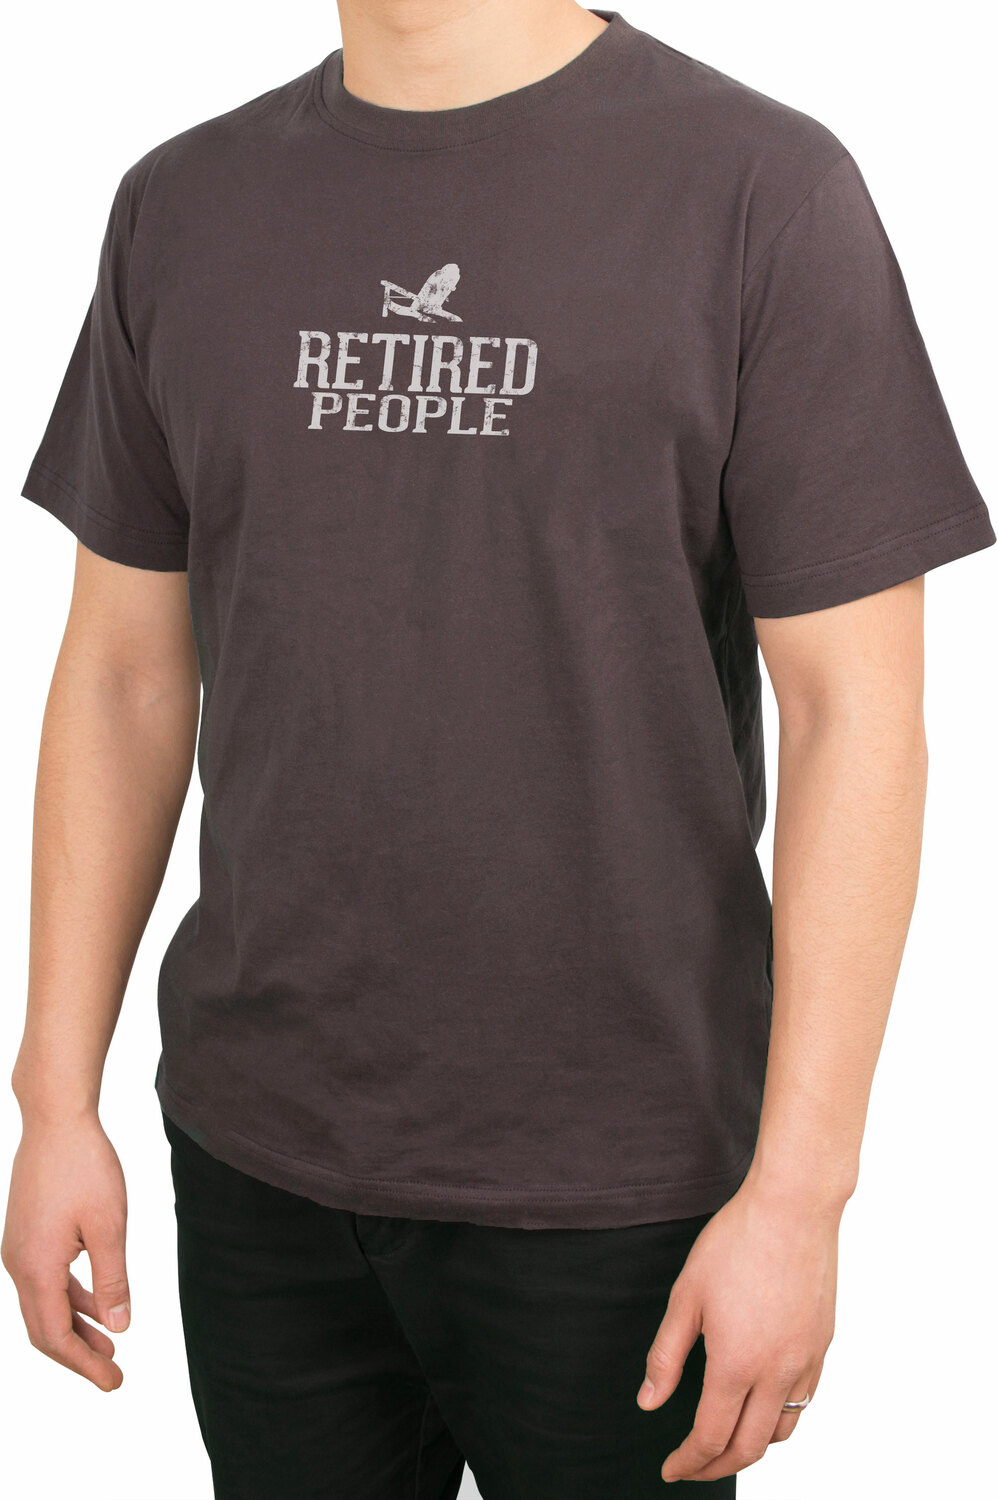 Retired People by We People - Retired People - Medium Charcoal Unisex T-Shirt